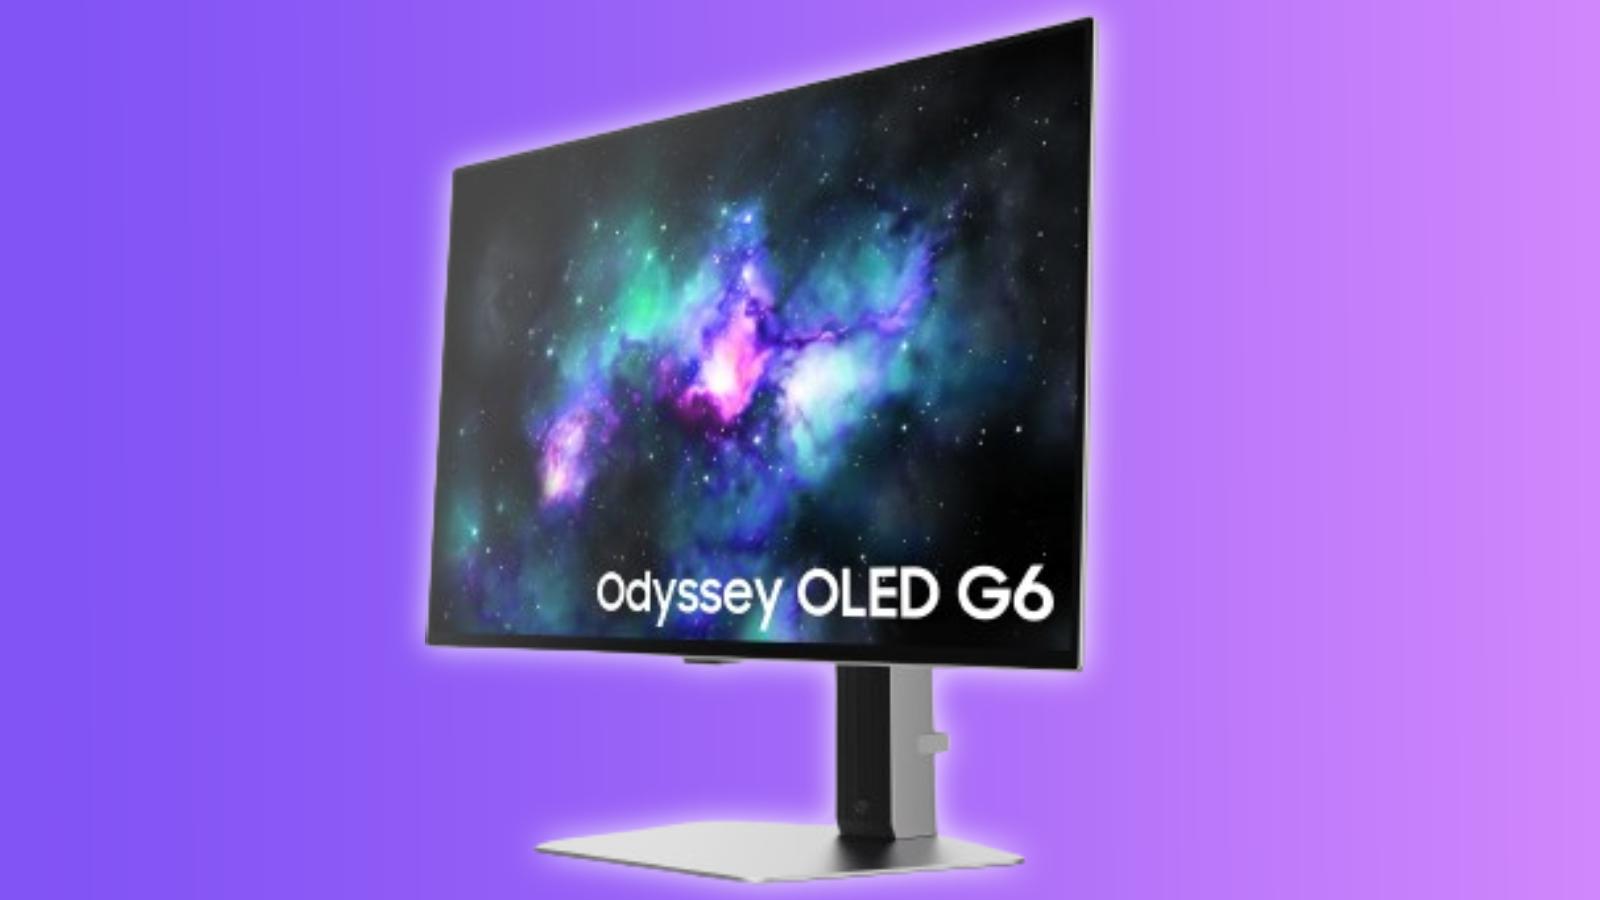 Image of the G6 Odyssey Samsung OLED gaming monitor, on a purple and pink background.